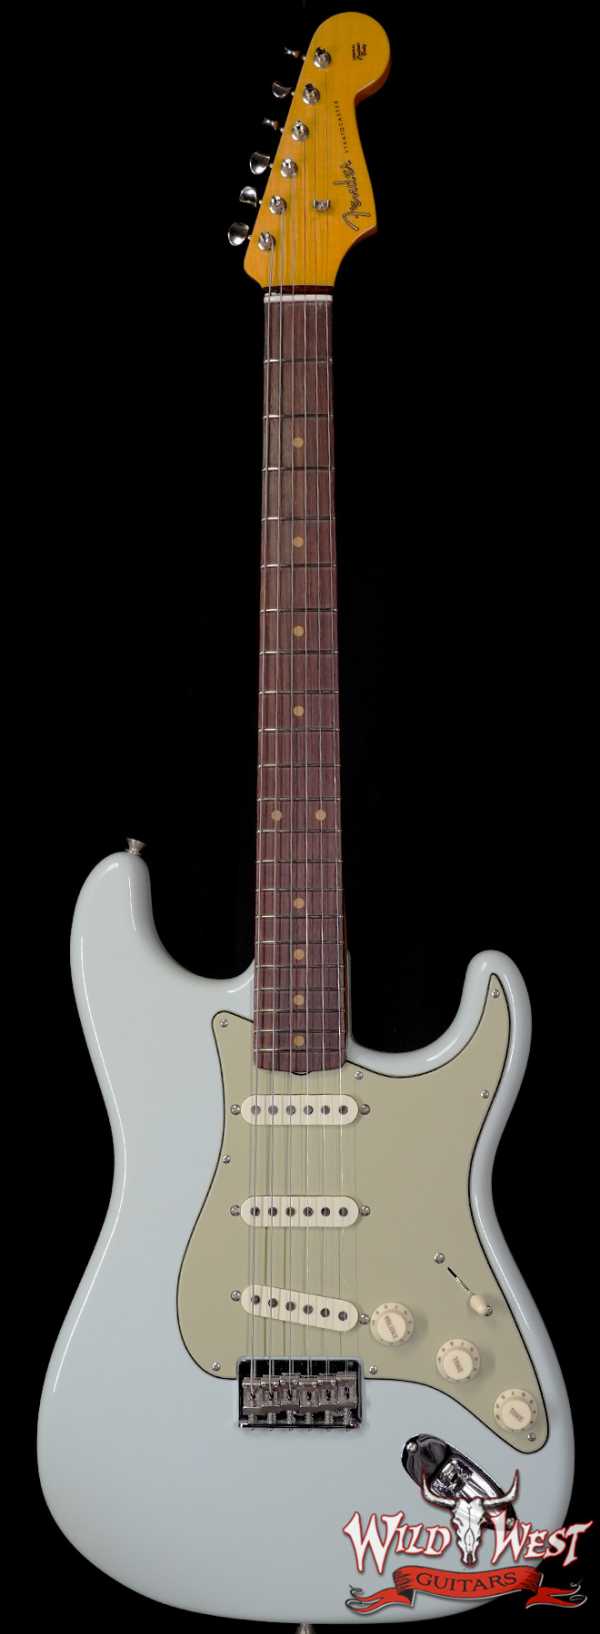 Fender Custom Shop Vintage Custom ‘59 1959 Hardtail Stratocaster Time Capsule Package Faded Aged Sonic Blue 7.55 LBS